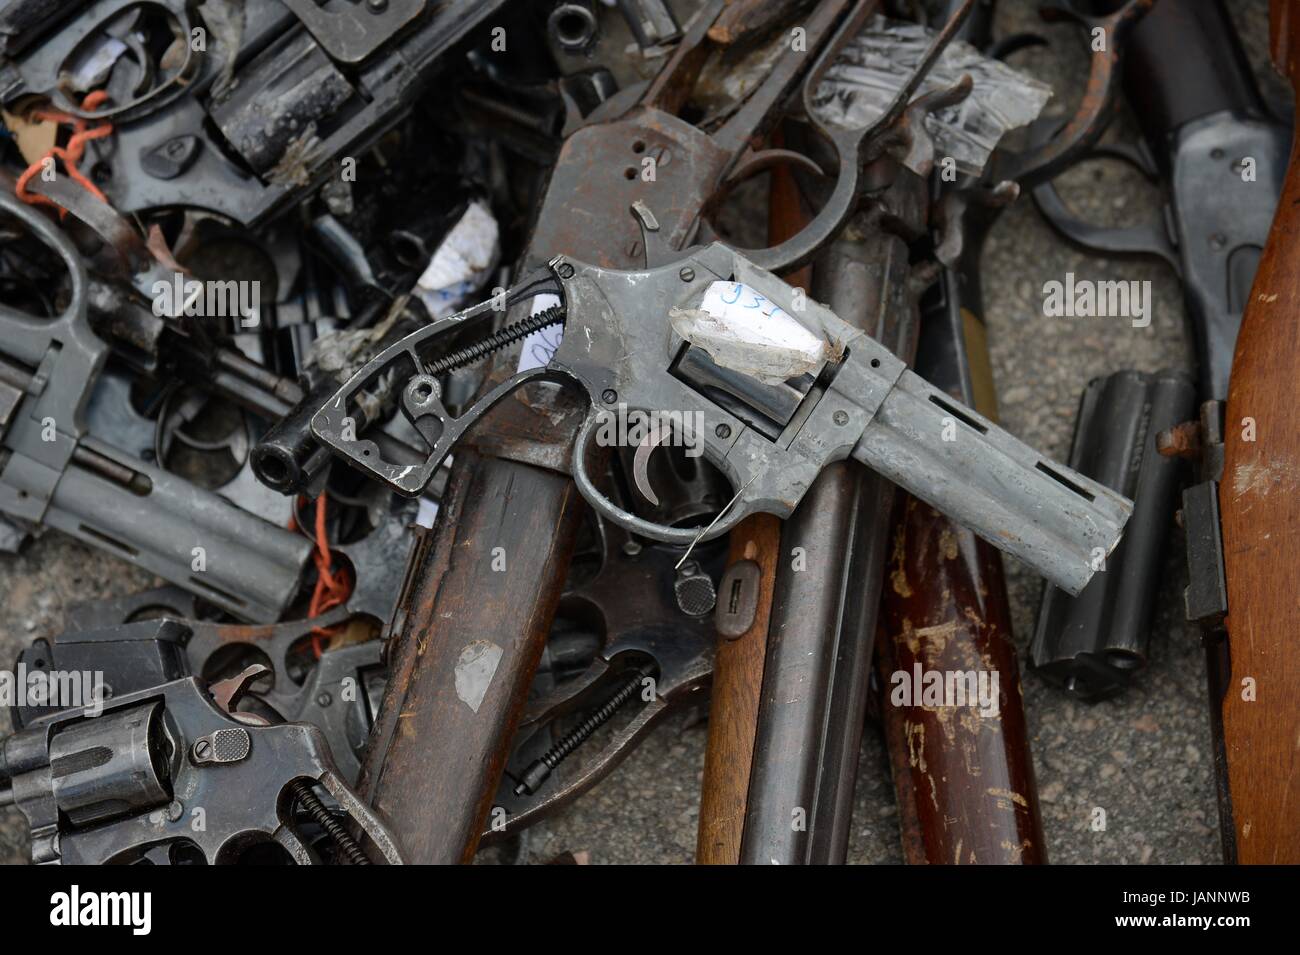 Police prepare to destroy more than 4000 firearms confiscated from criminals over the past two years June 2, 2017 in Rio de Janeiro, Brazil.   (photo by Tania Rego/Agency Brasil via Planetpix) Stock Photo